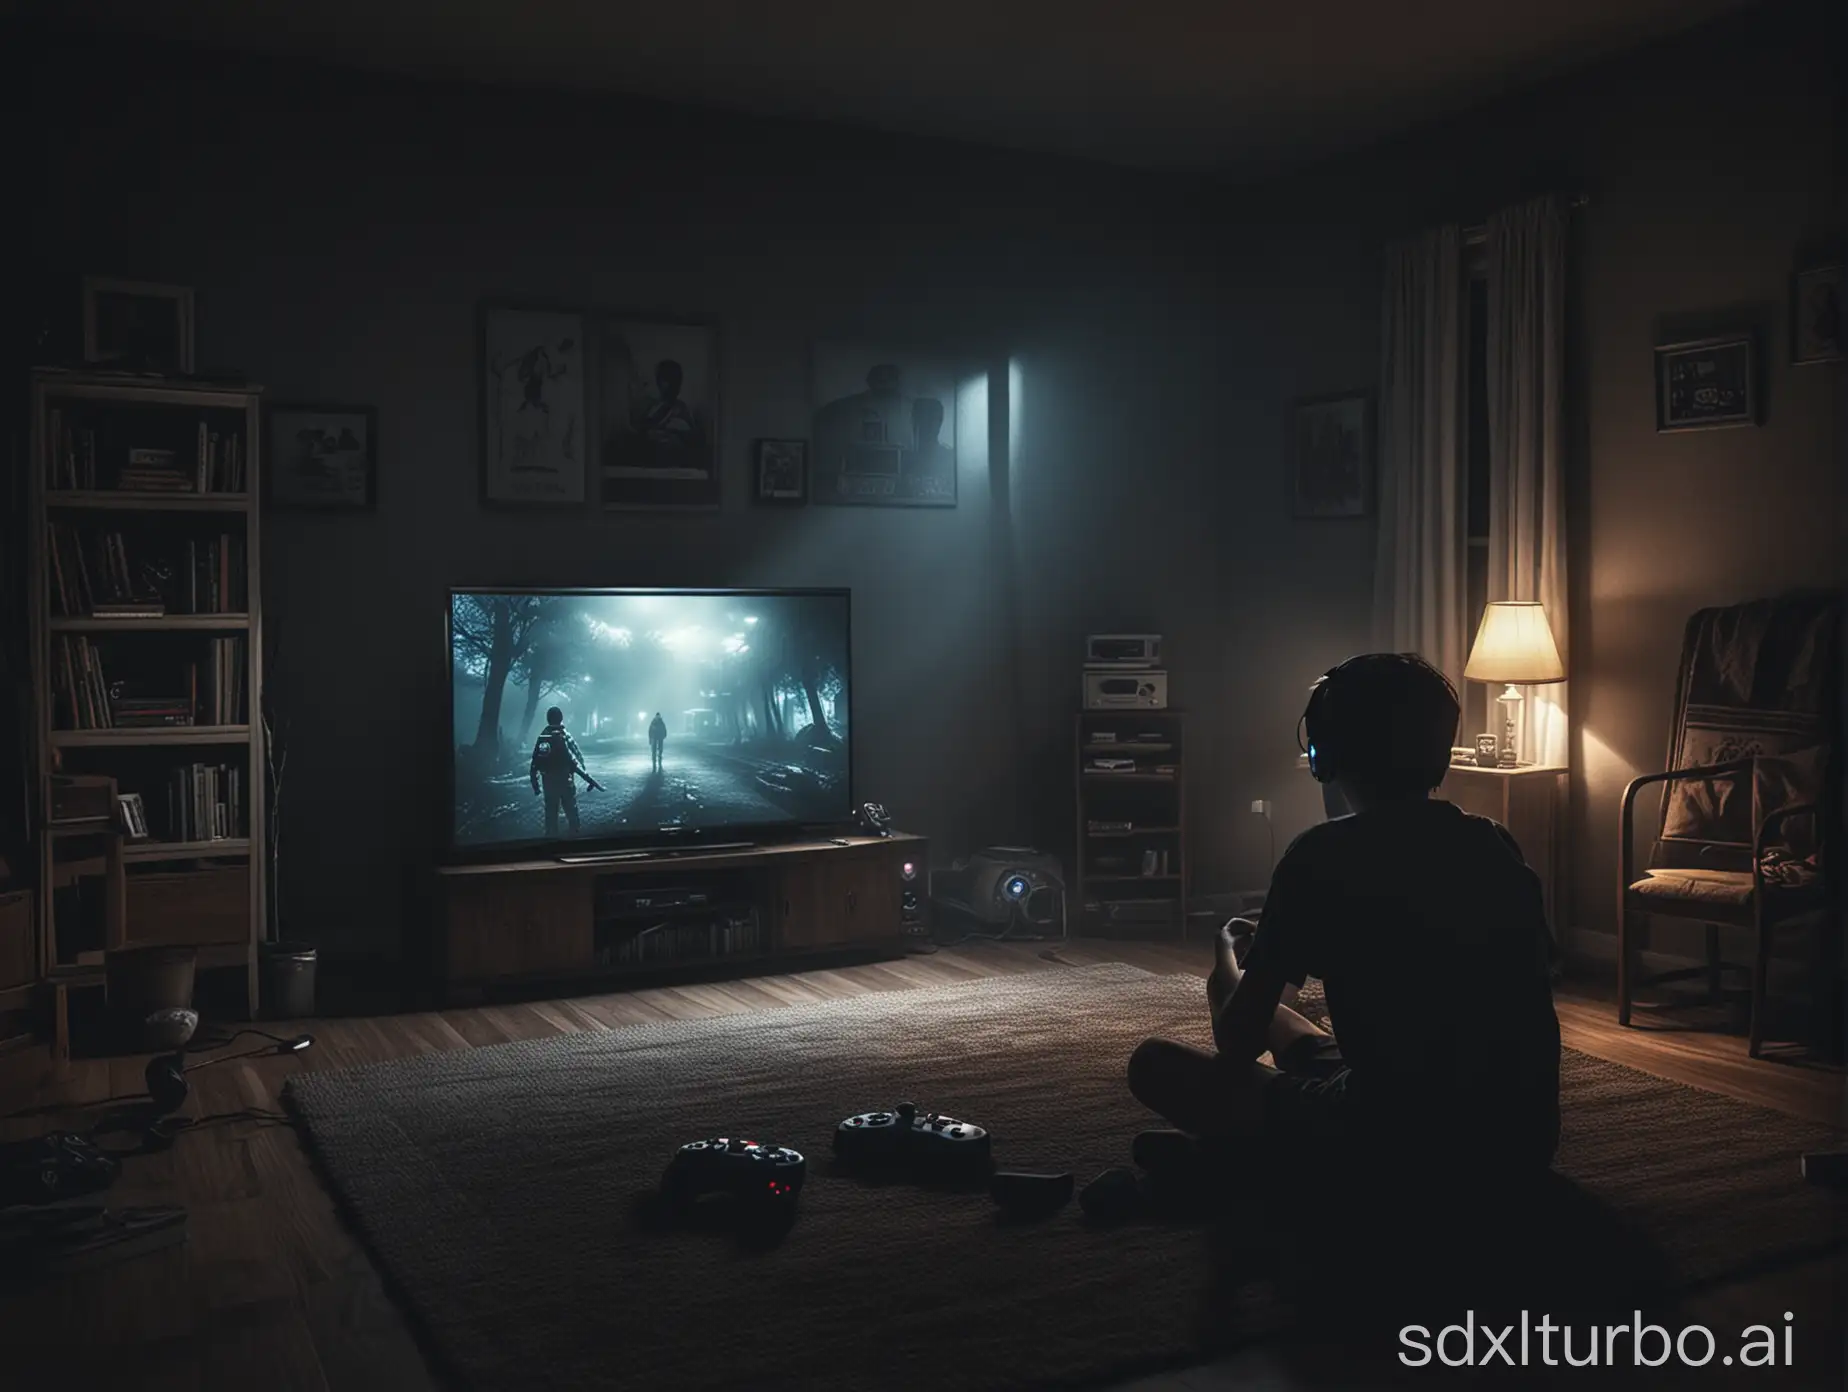 Create a high resolution, 16:9 aspect ratio, image about "true gaming scary stories". Show one boy playing video games in the center of the picture, alone, in front of a TV, at night, dark room, menacing video game, console, night lights, photorealistic, dark, sketchy, atmospheric, catchy, vibrant colors, must pop and catch attention.